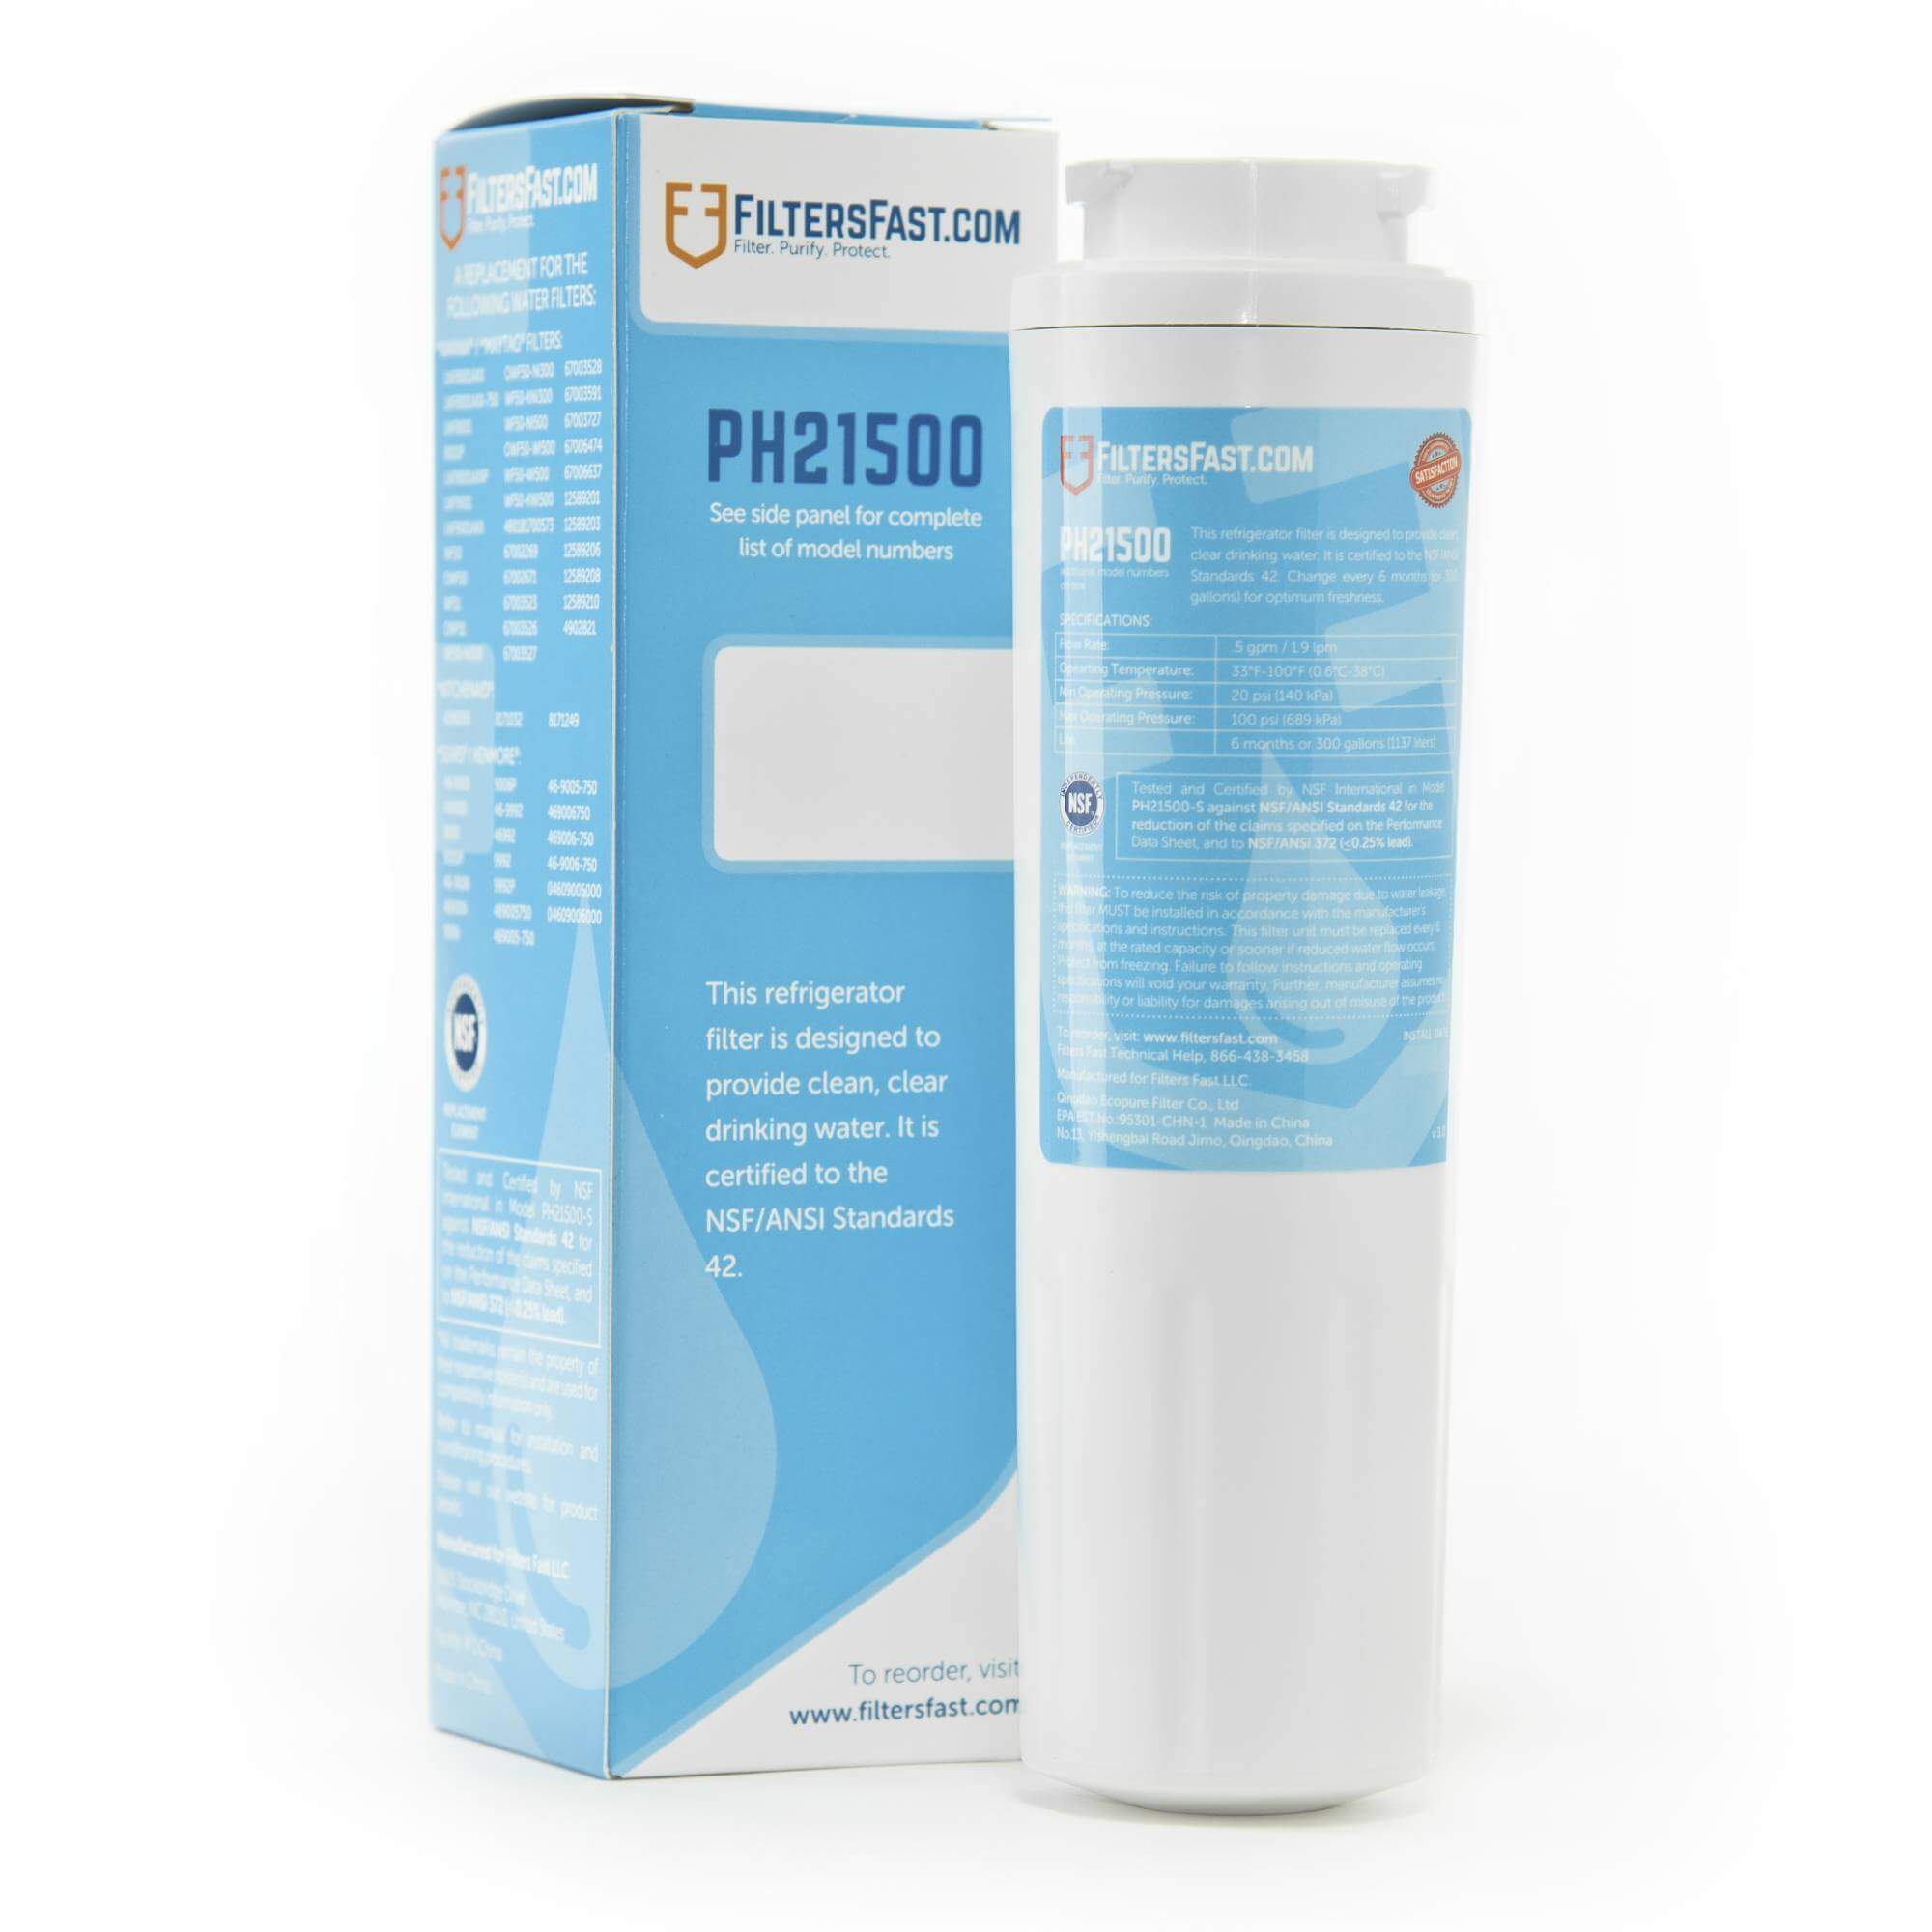 Filters Fast® PH21500 Replacement for Filters Fast&reg FF21500 thumbnail